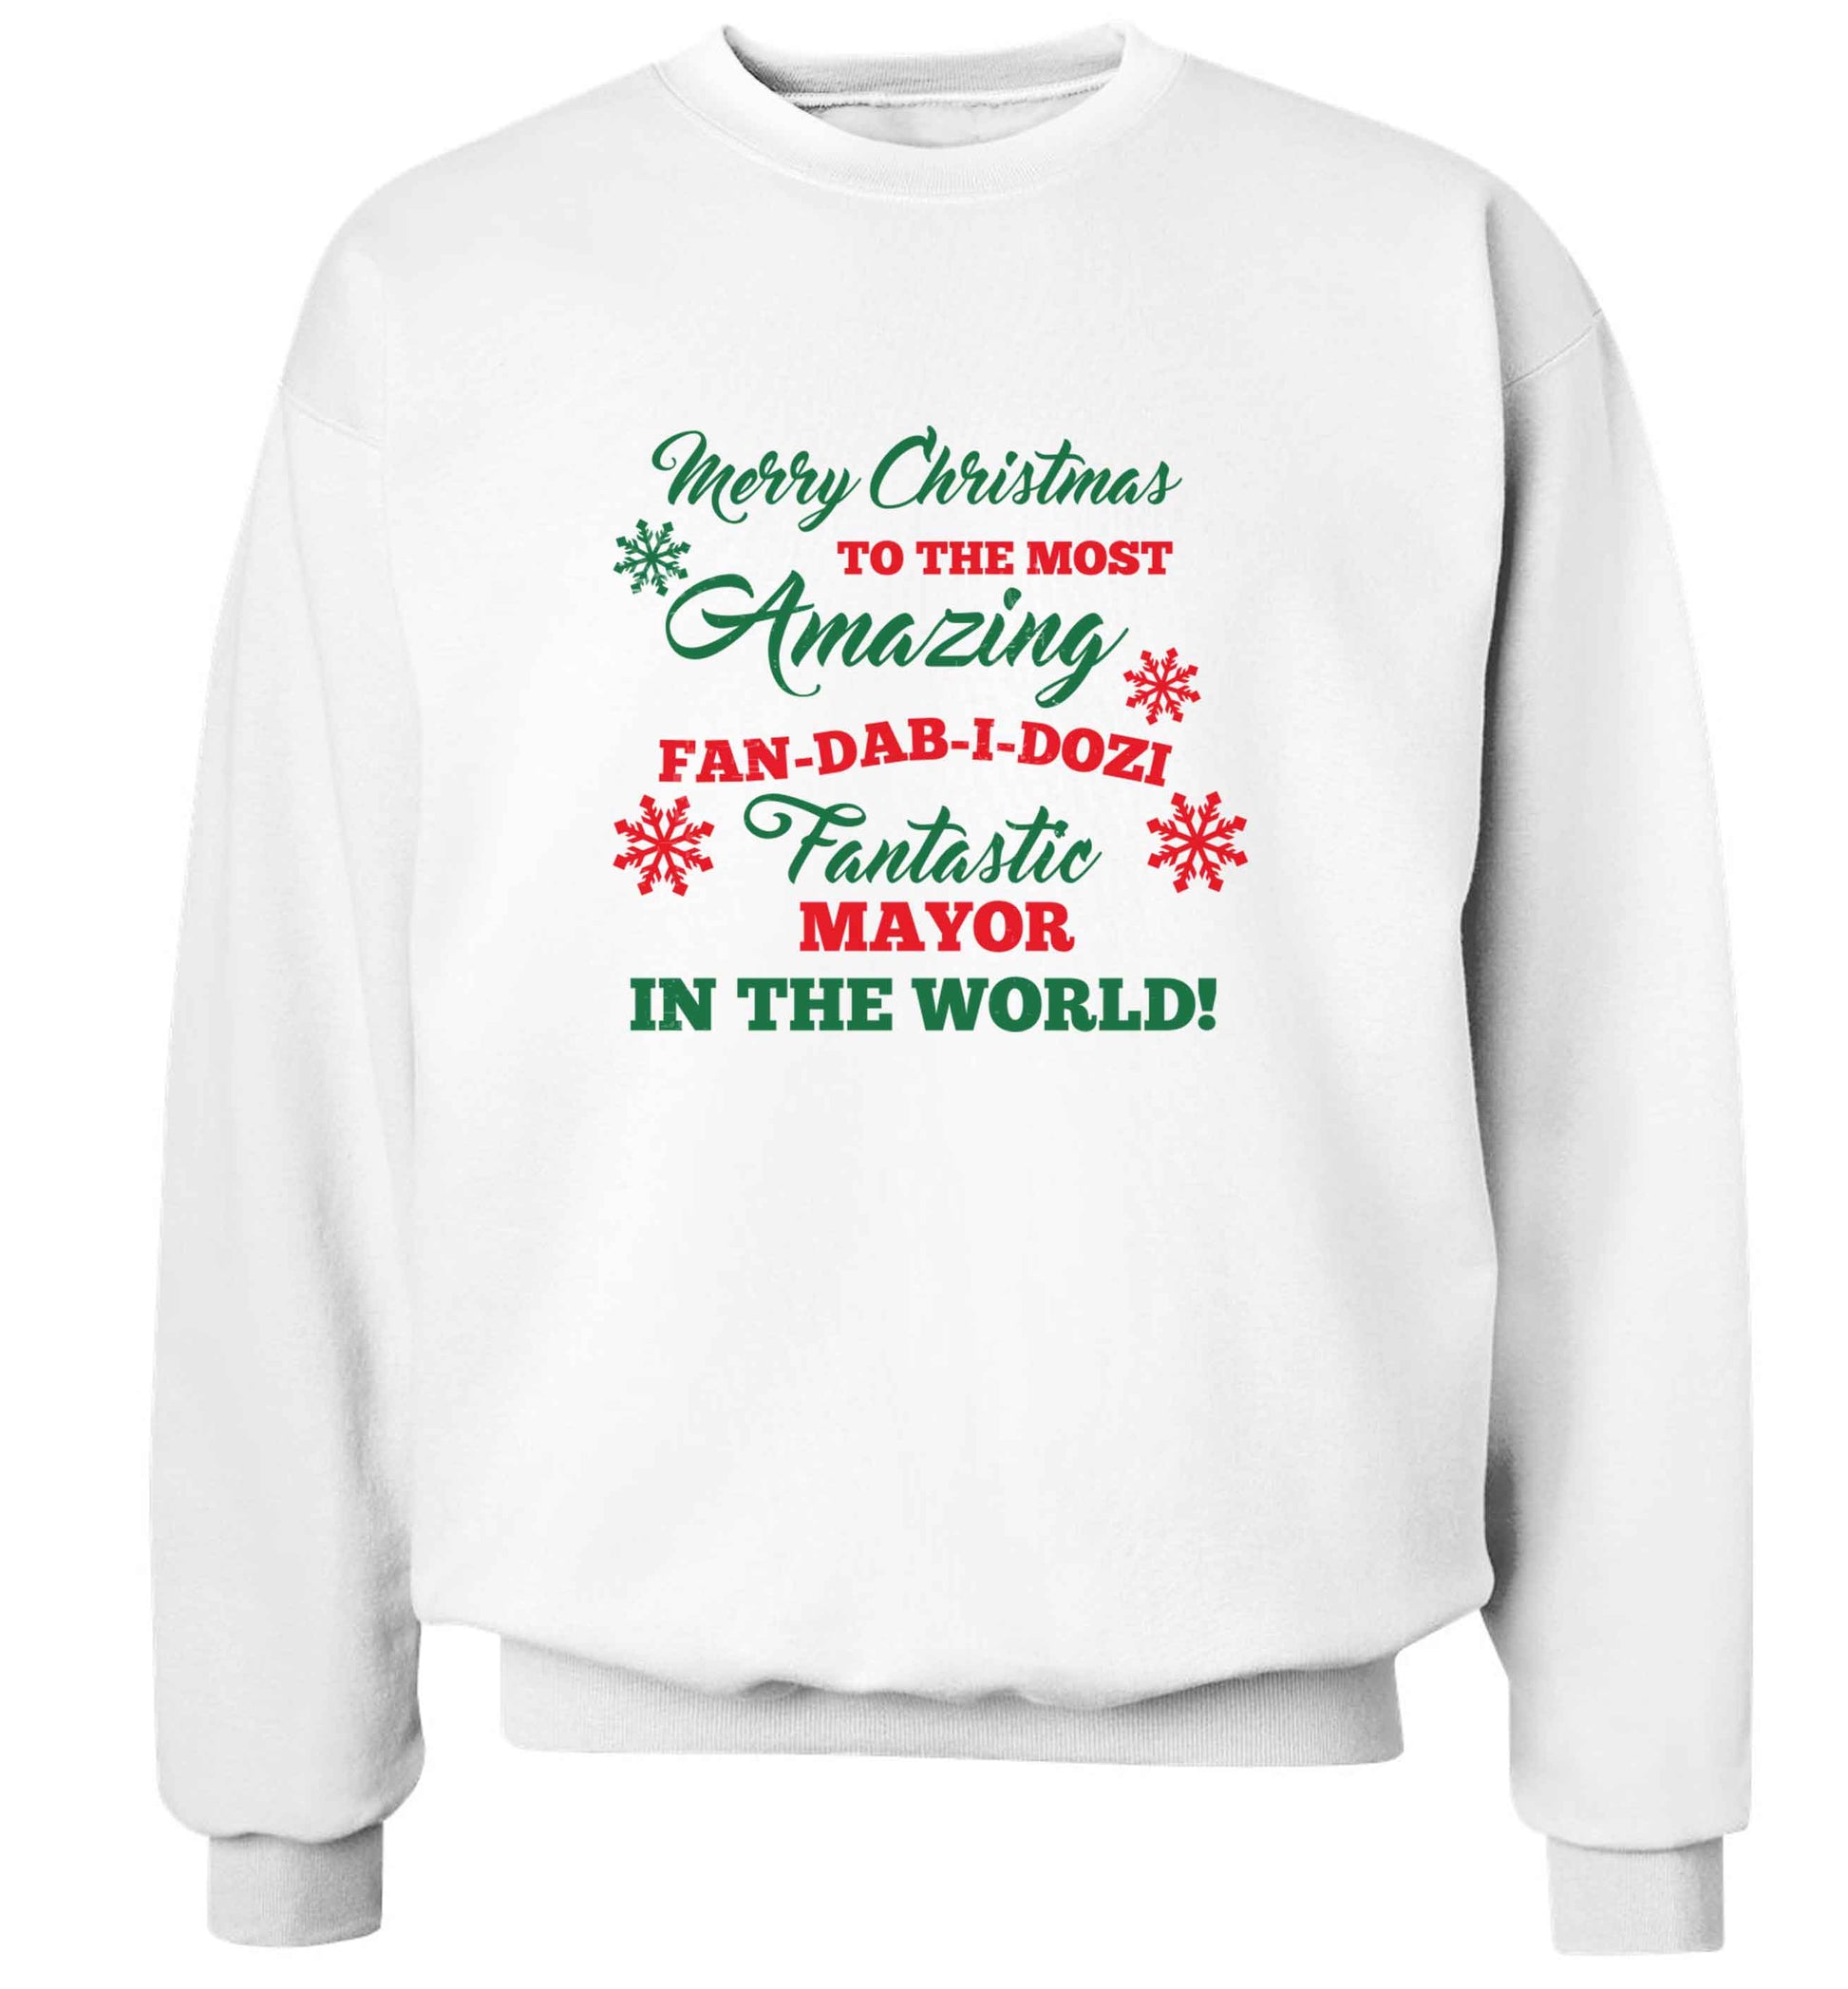 Merry Christmas to the most amazing fireman in the world! adult's unisex white sweater 2XL